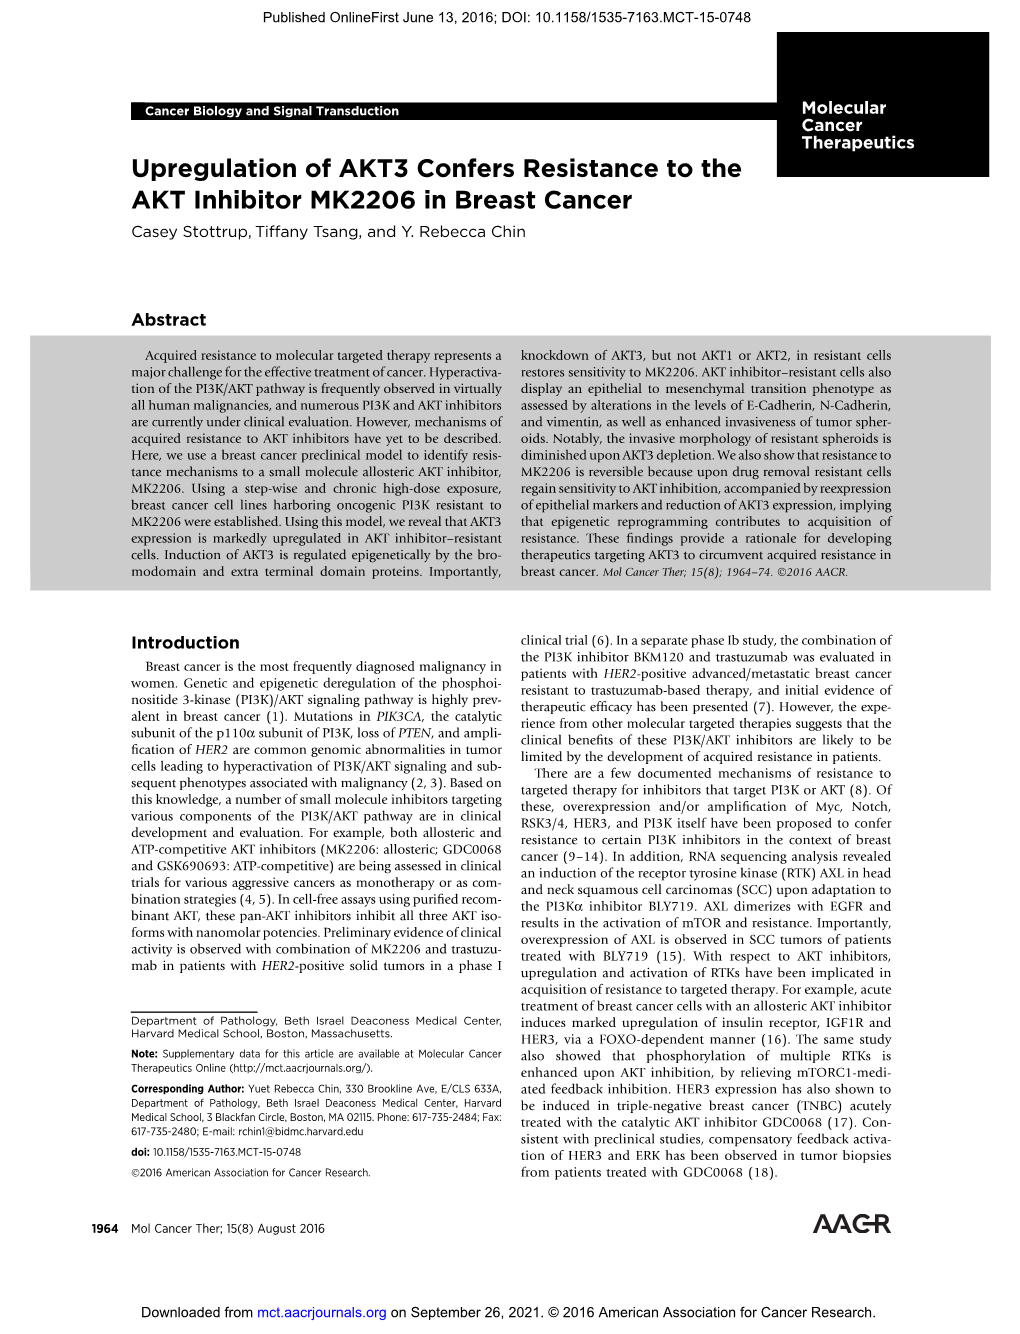 Upregulation of AKT3 Confers Resistance to the AKT Inhibitor MK2206 in Breast Cancer Casey Stottrup, Tiffany Tsang, and Y